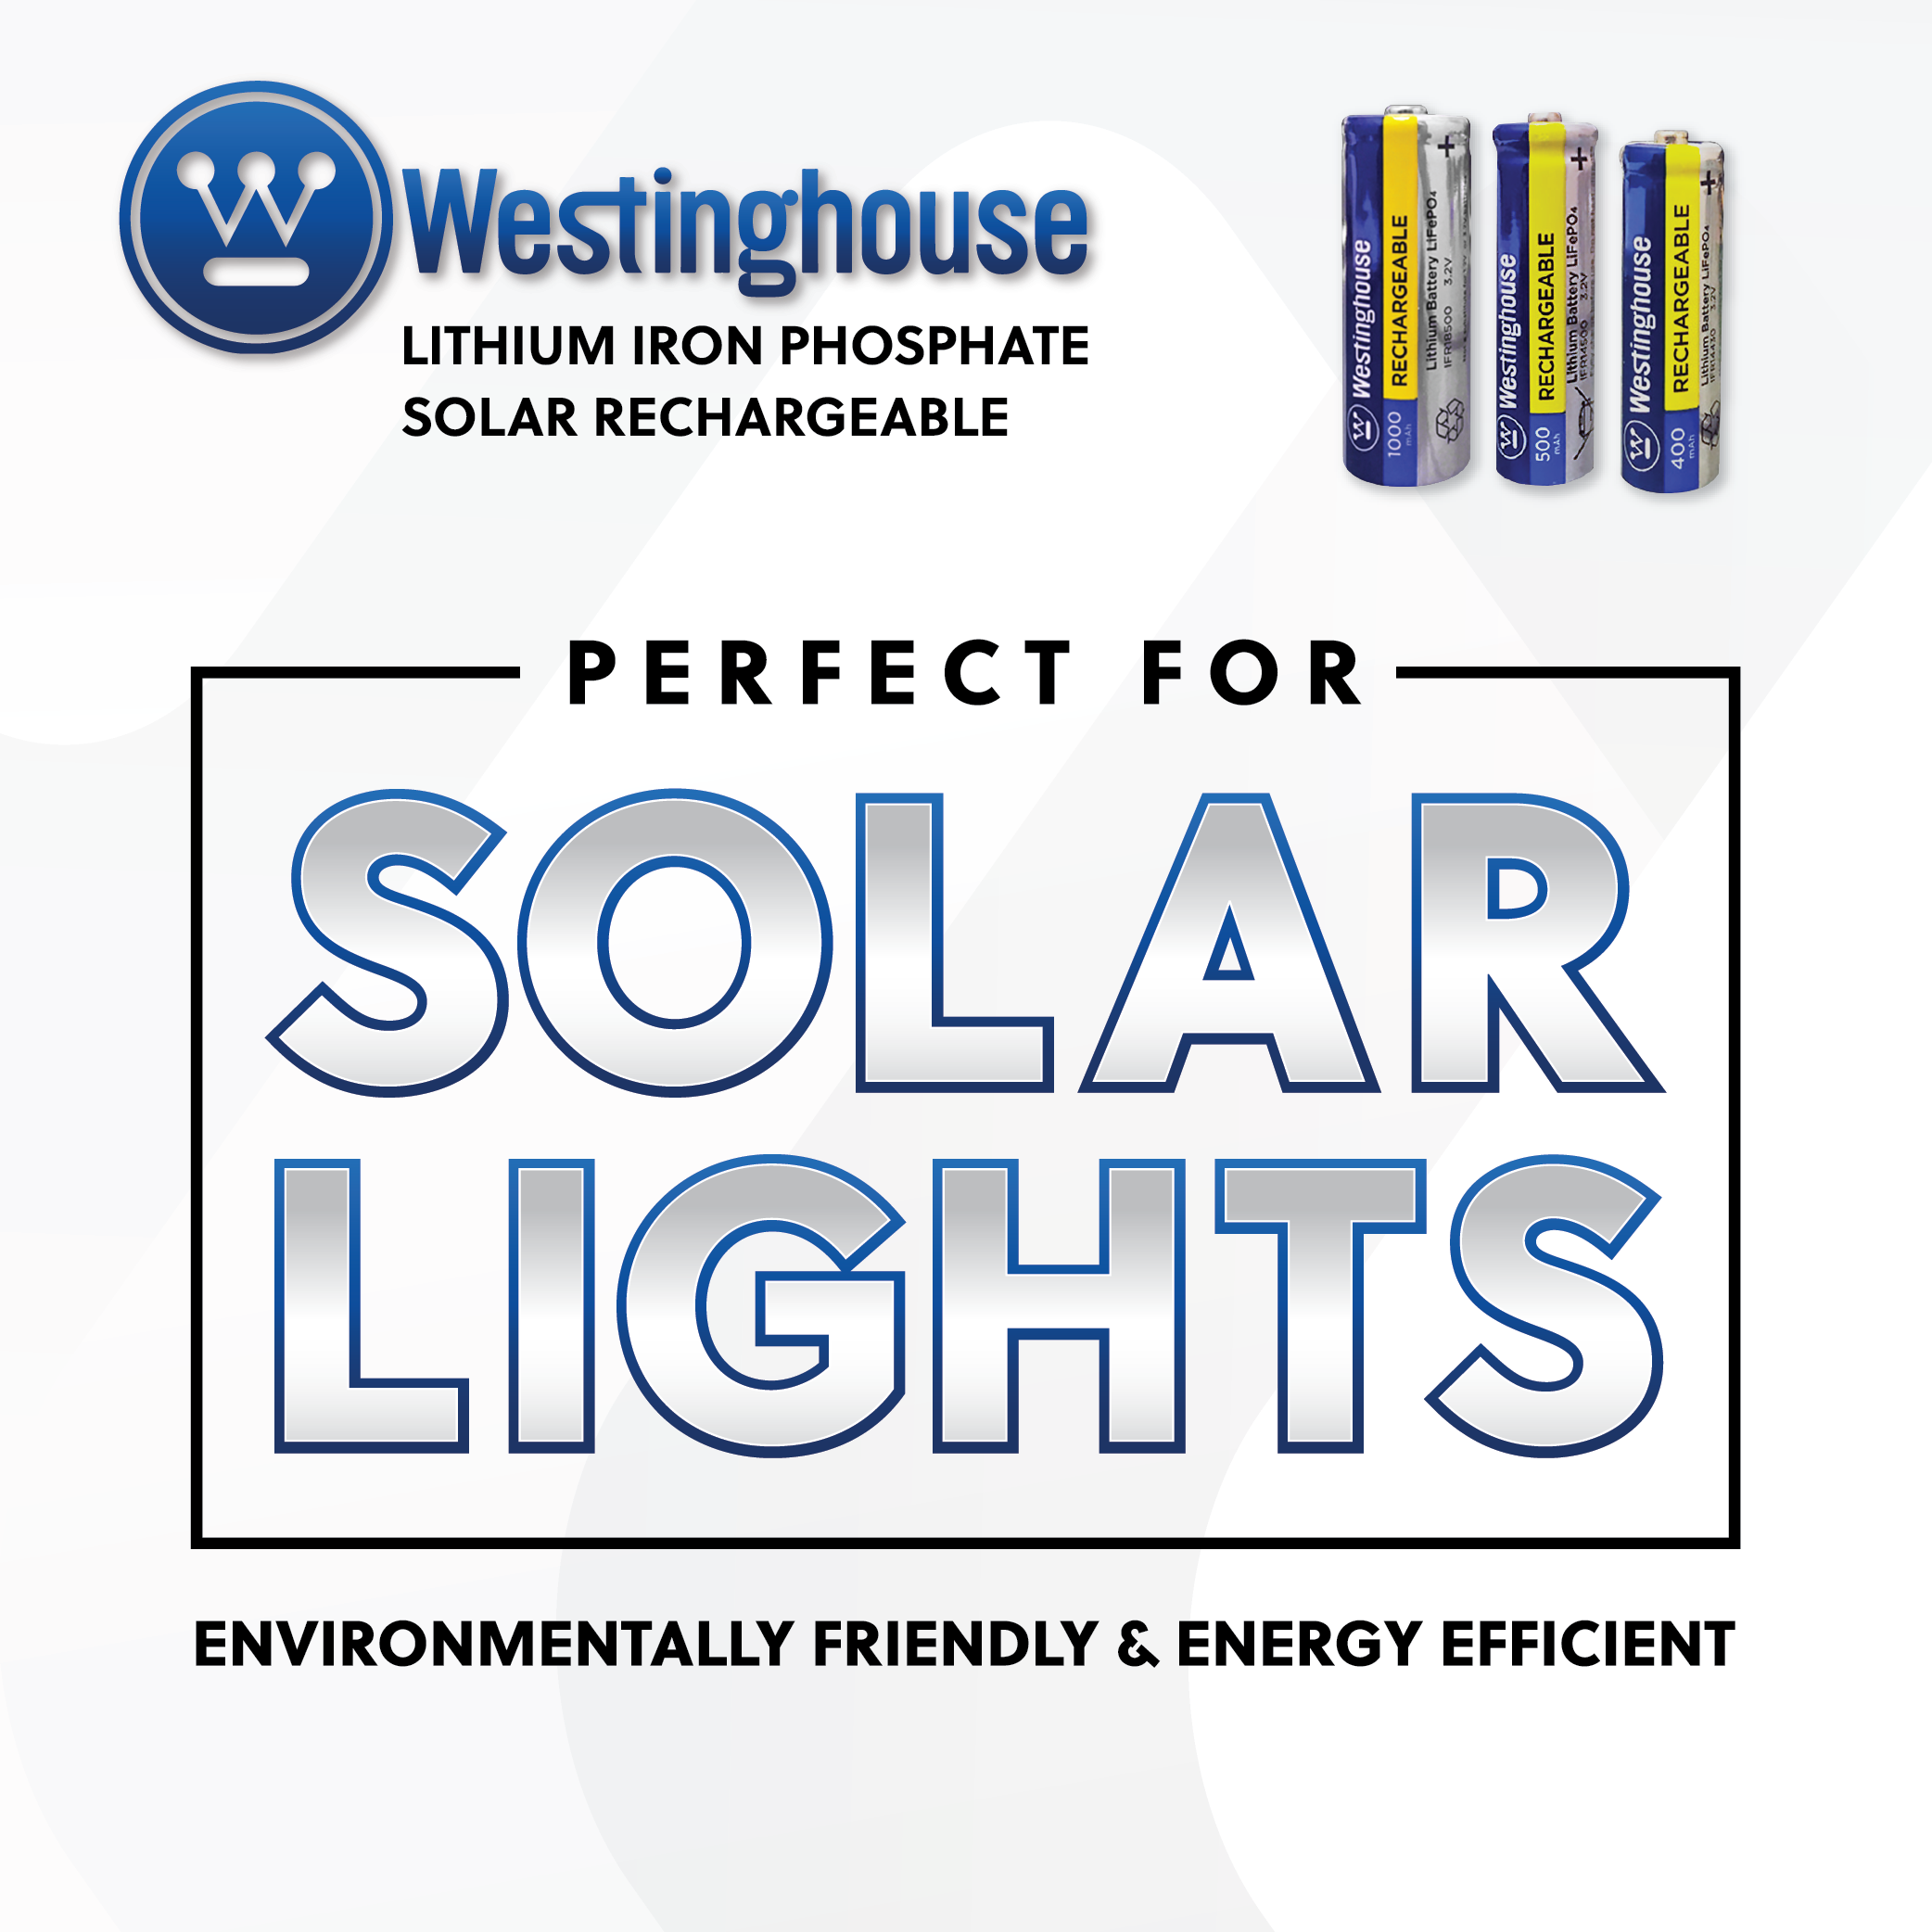 Westinghouse Lithium Iron Phosphate IFR14500 3.2v 500mah Solar Rechargeable Cardboard Box of 8